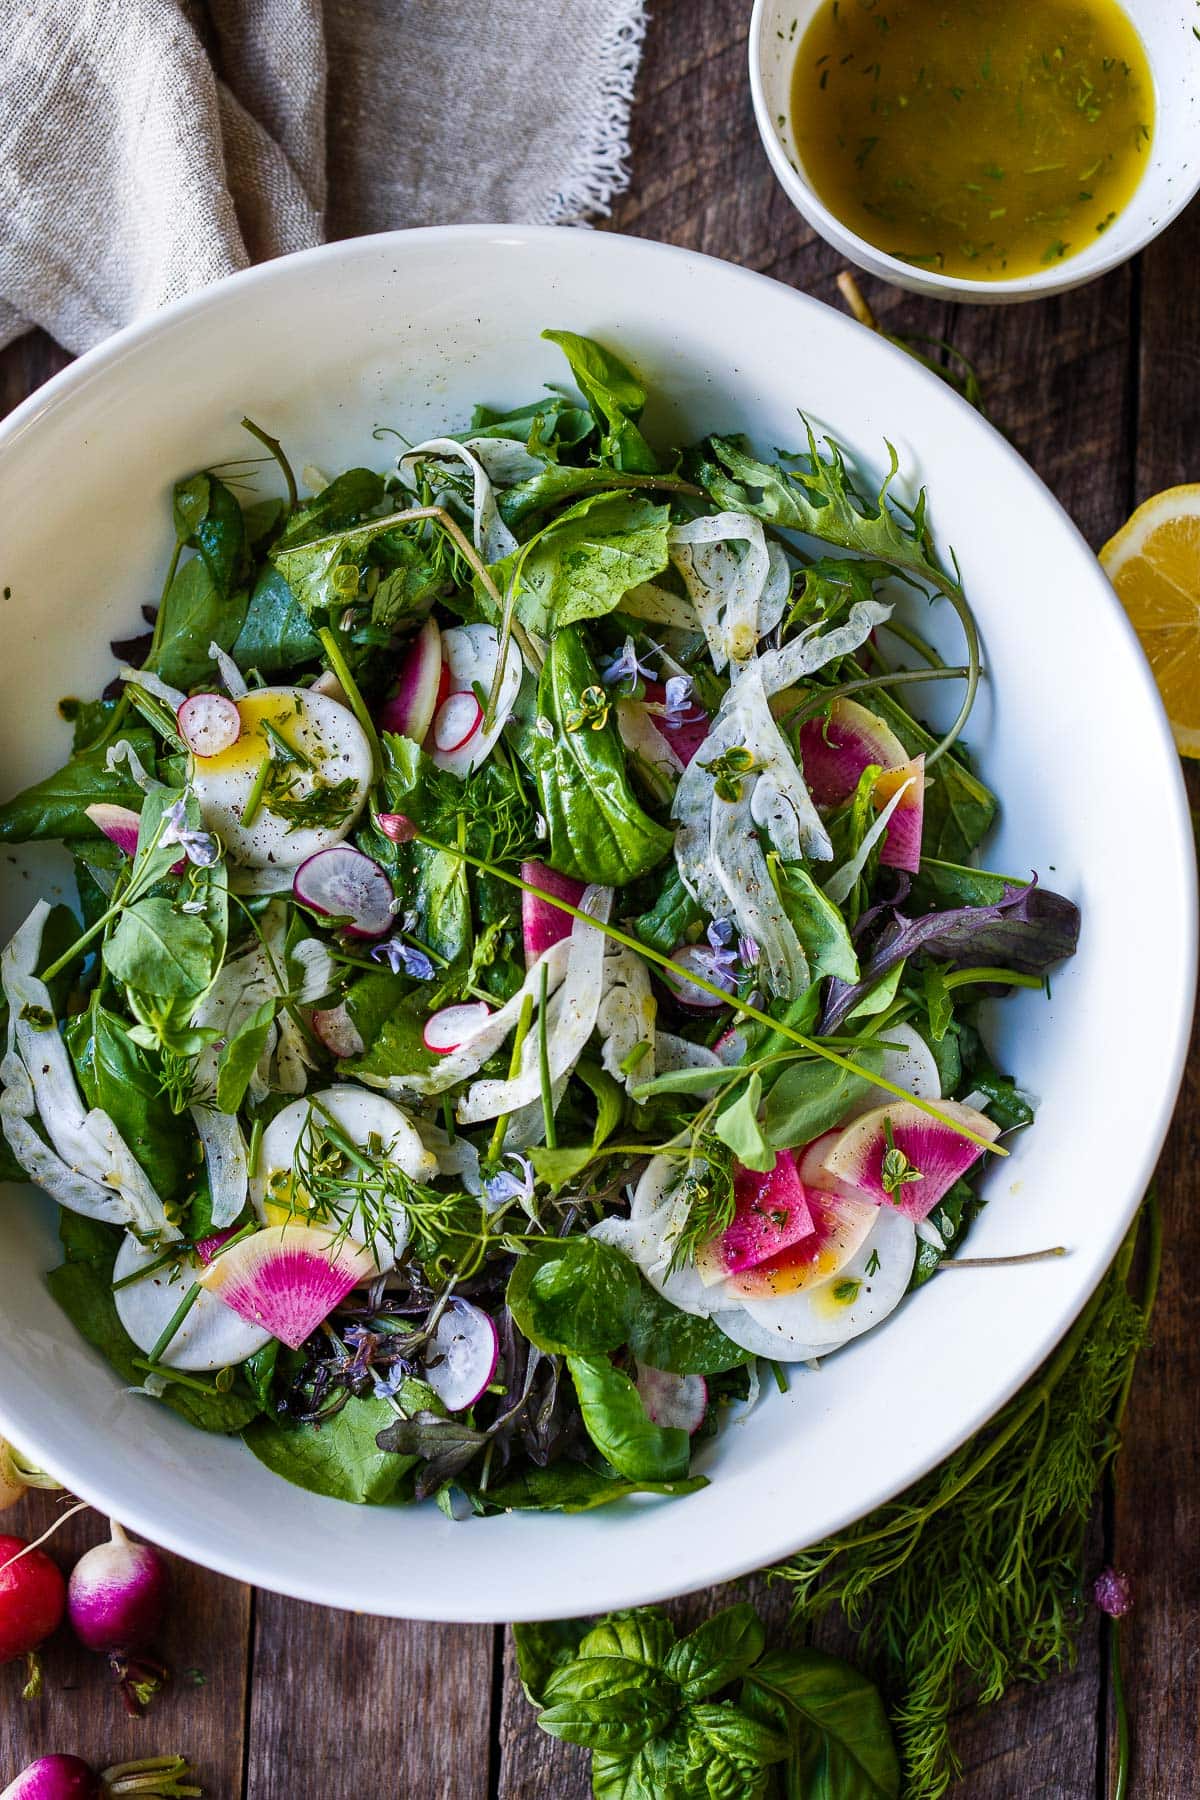 Simple, herby, and delicious, this spring salad recipe is made with tender spring greens, fresh herbs, shaved fennel, and radishes tossed in a lemon dressing